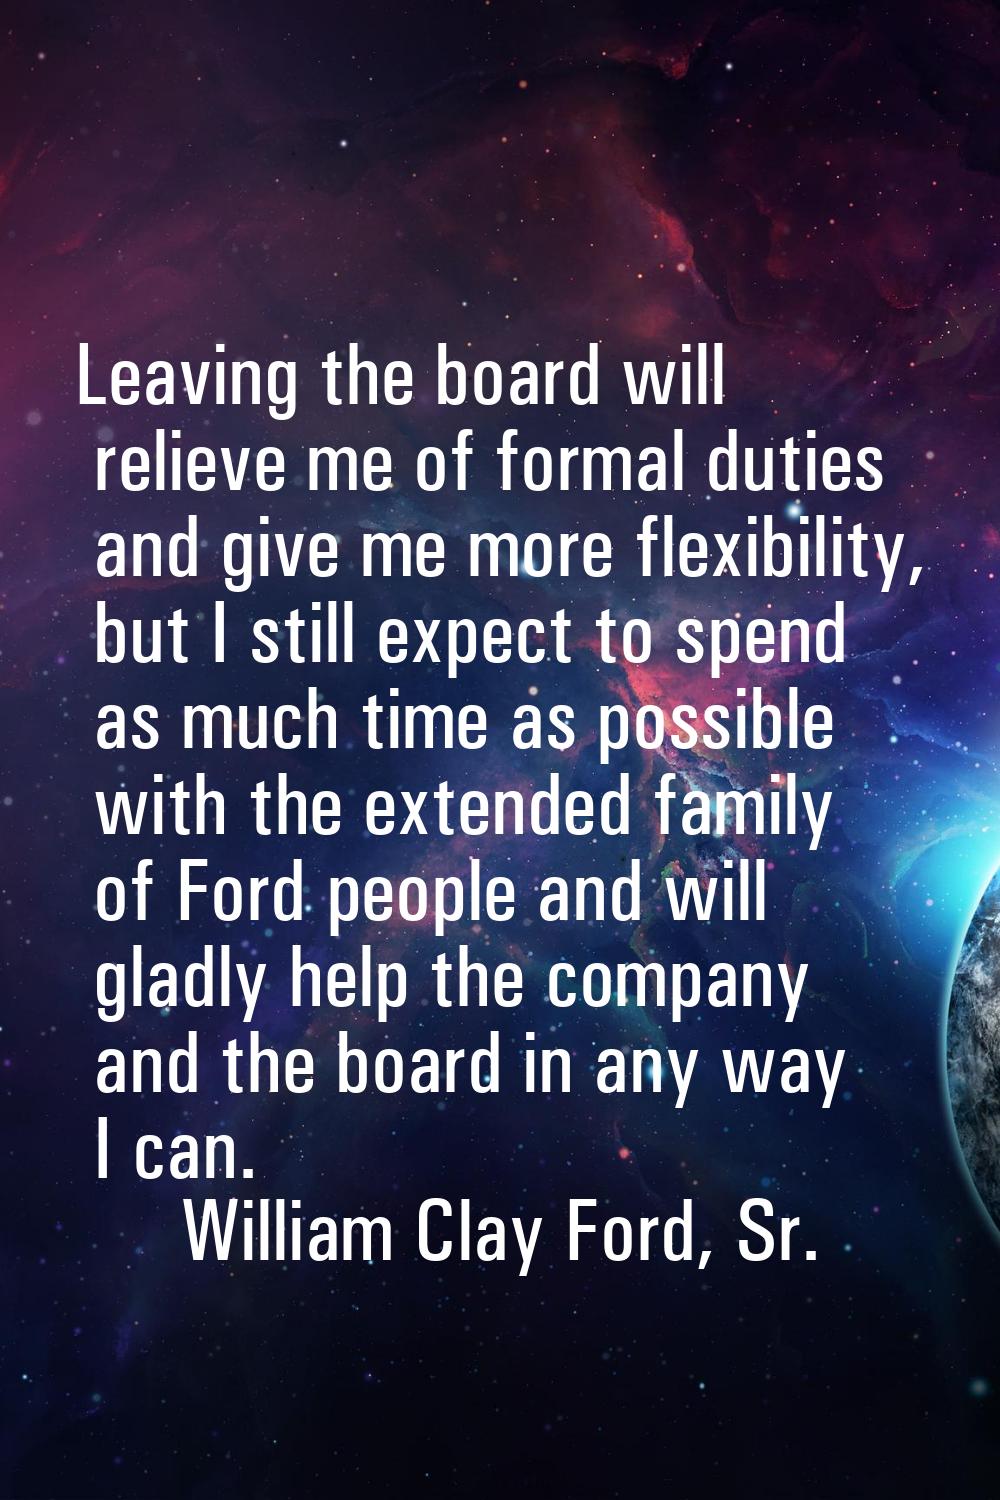 Leaving the board will relieve me of formal duties and give me more flexibility, but I still expect